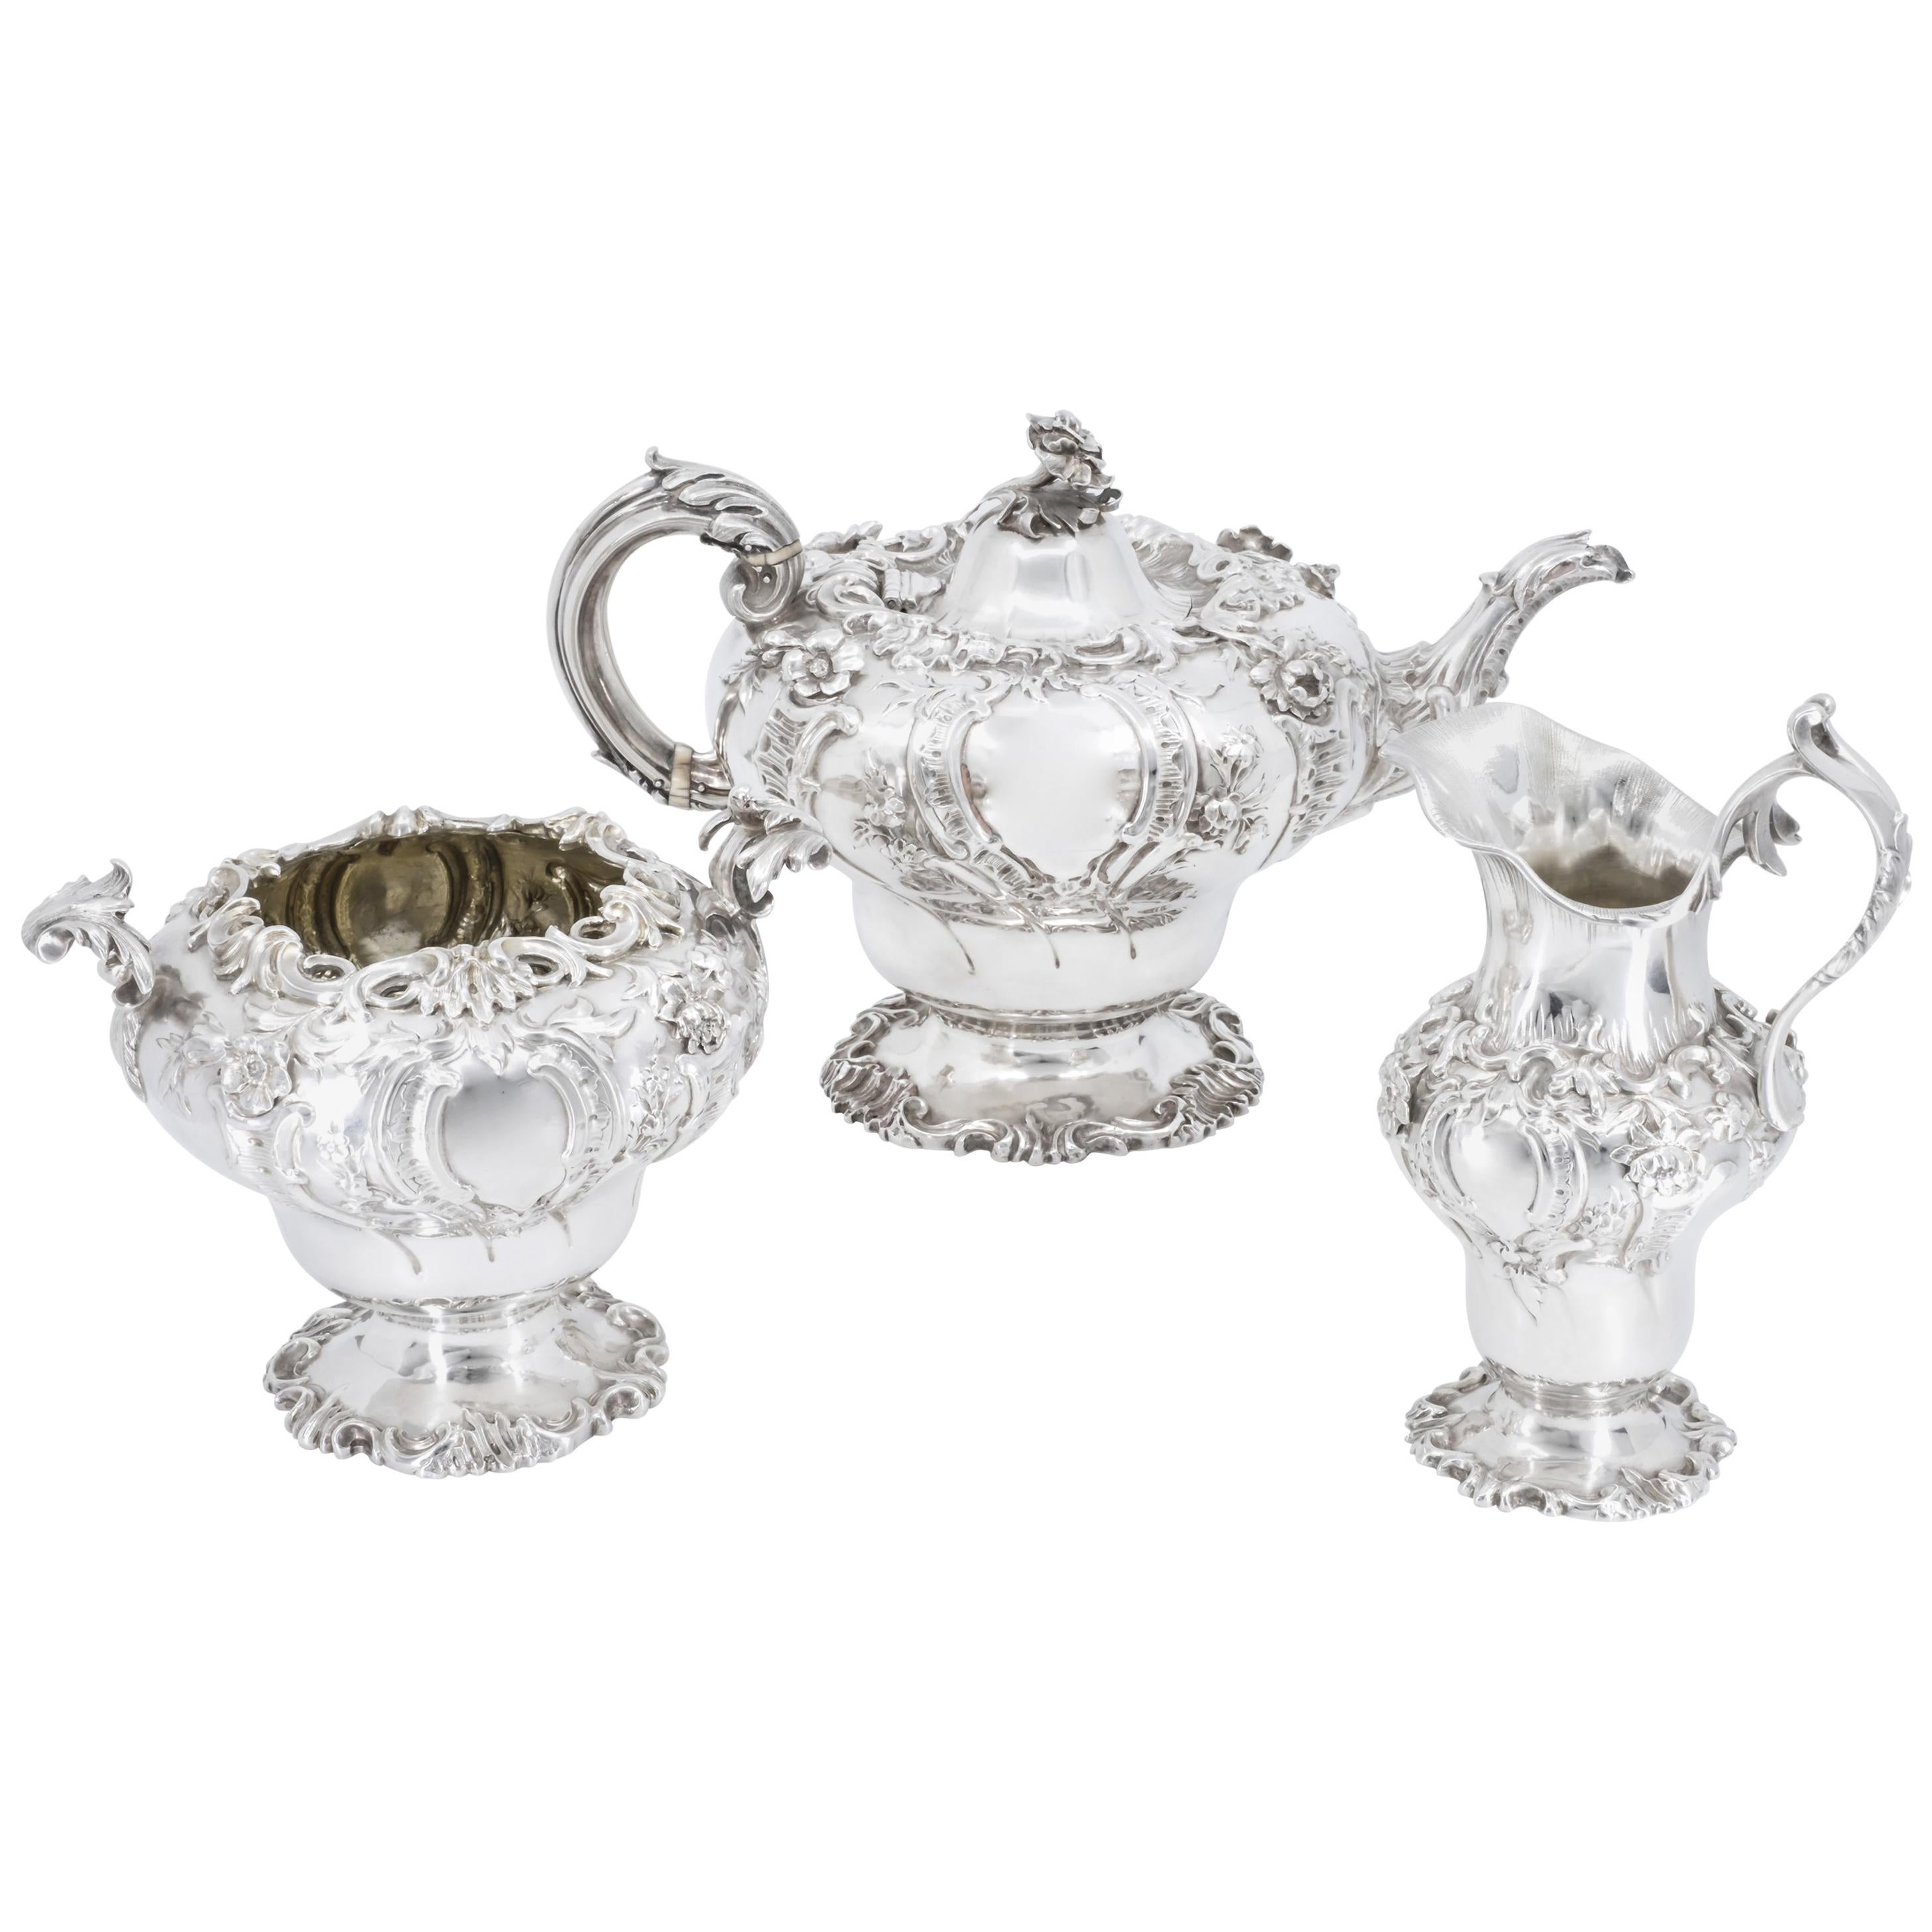 Tea Services in Rococo Style, London Sterling Sliver 925, Early 19th Century For Sale